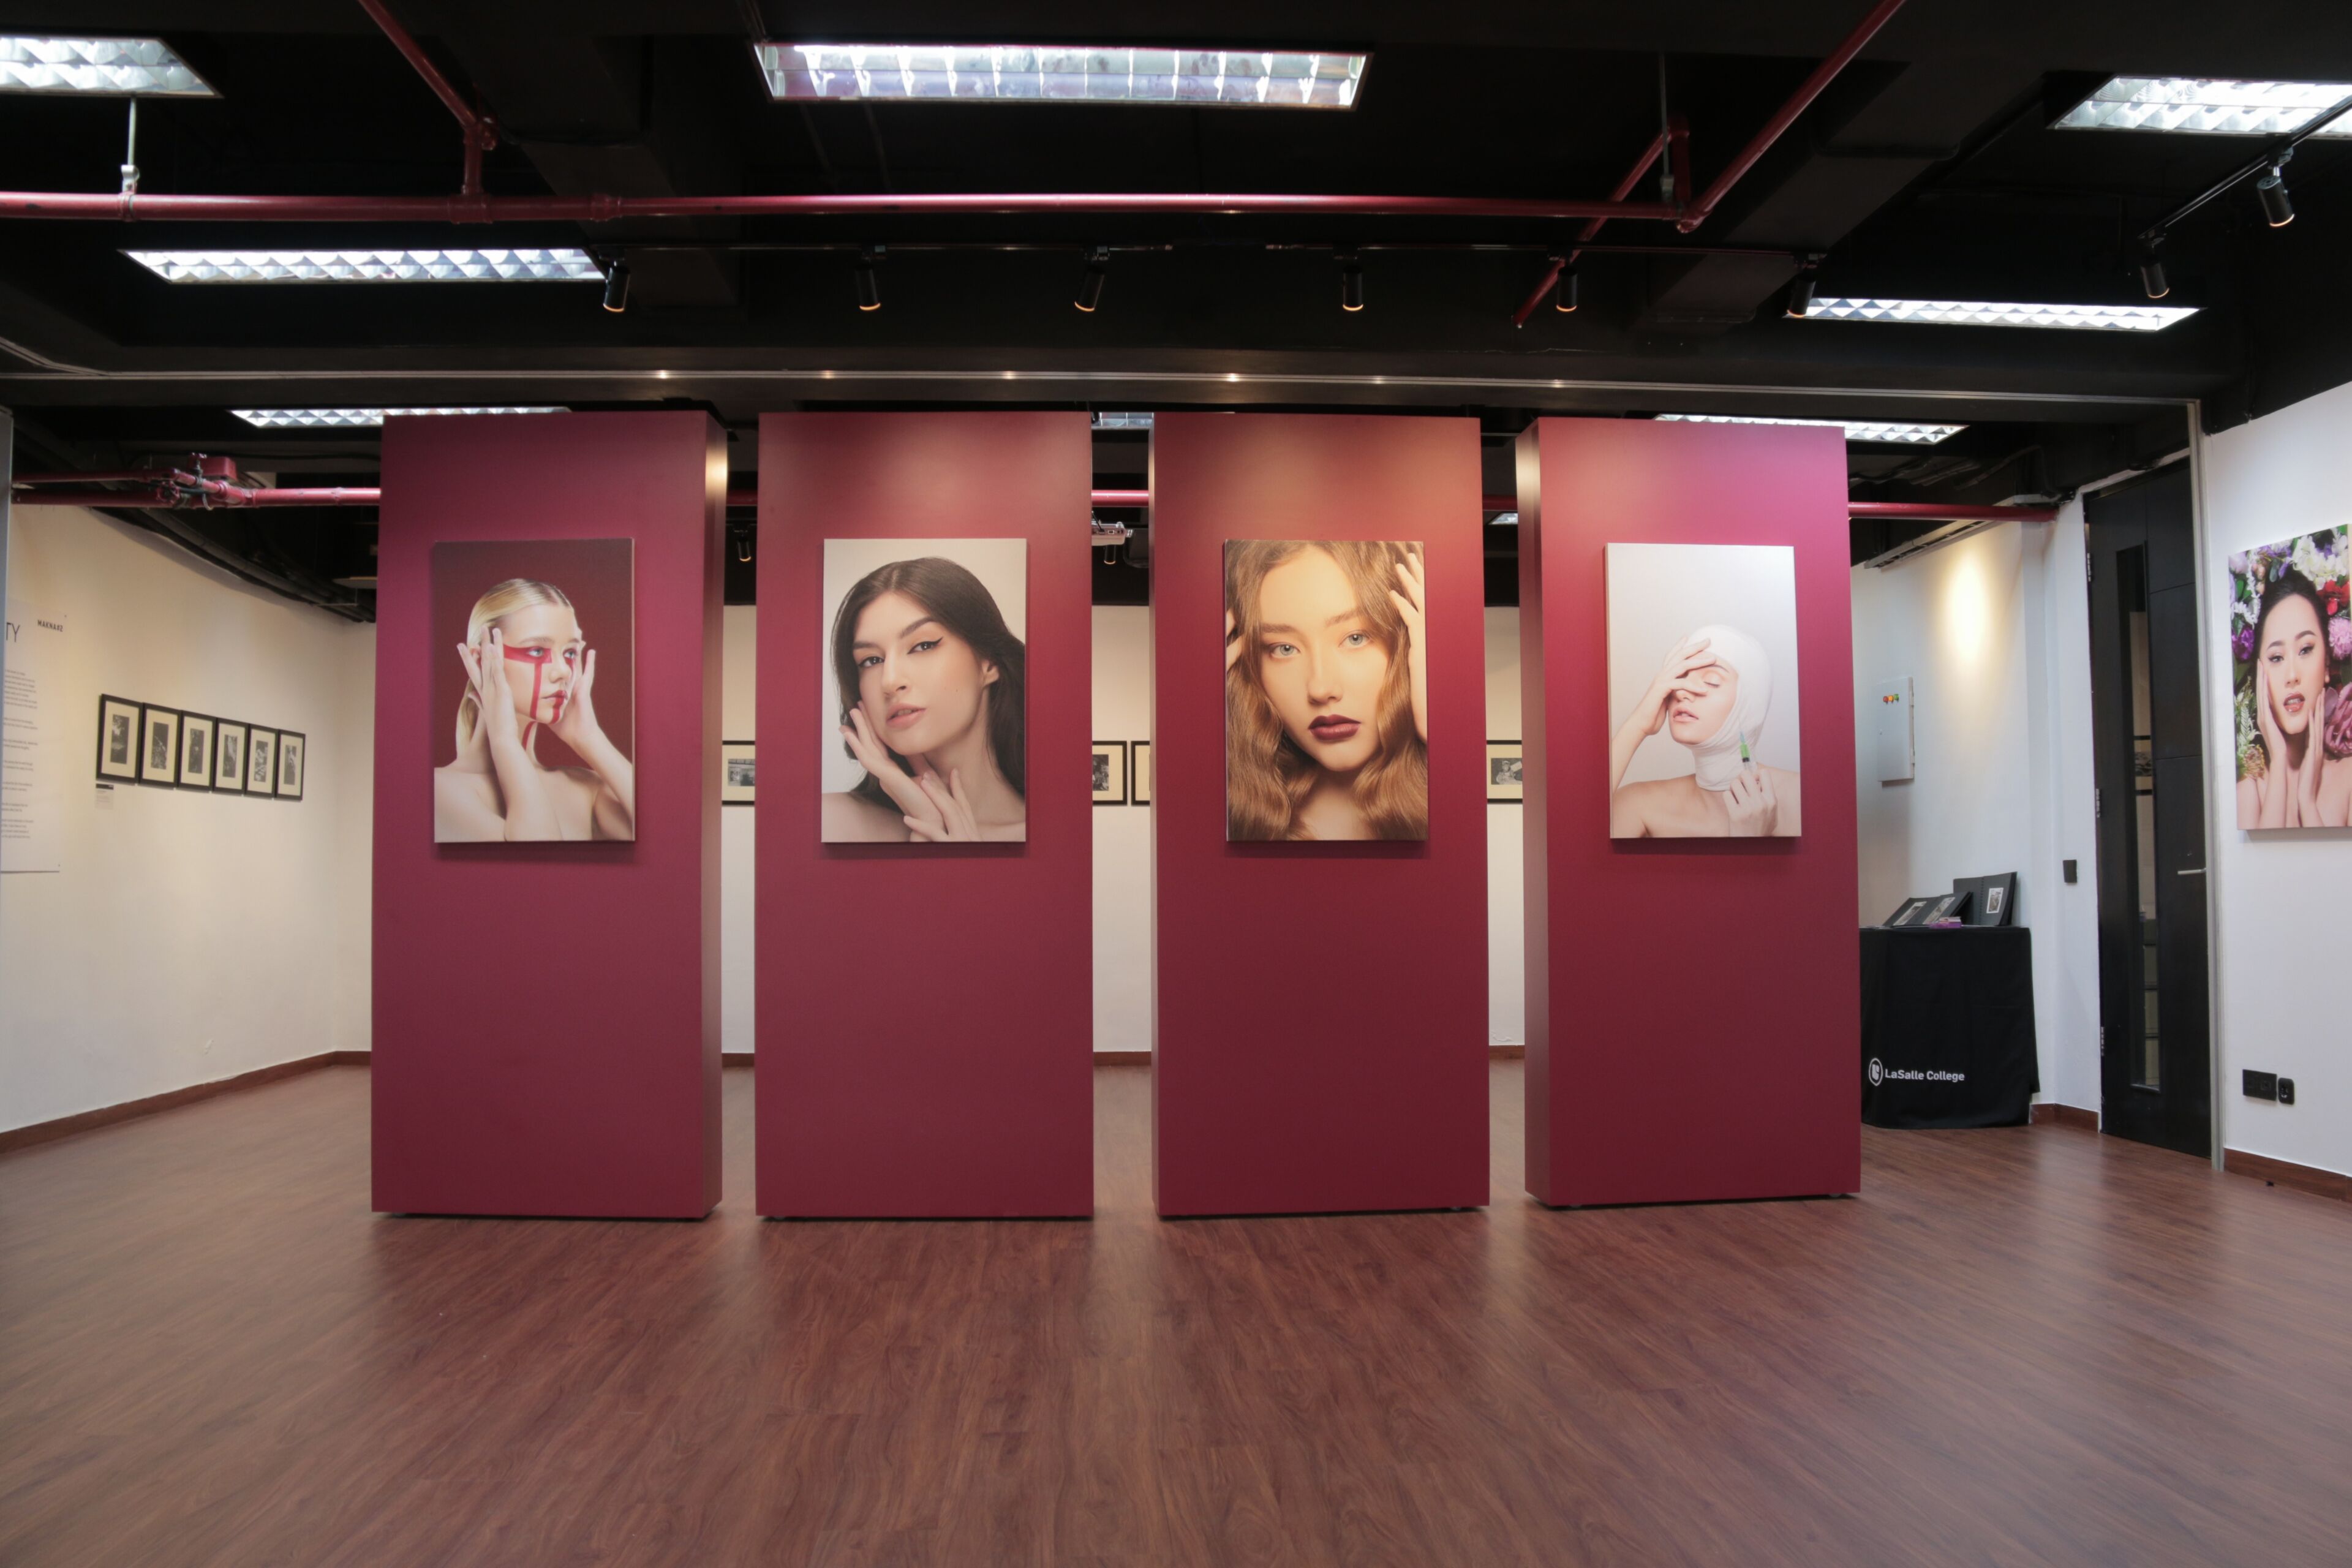 A modern art gallery displays large portraits of women against maroon panels, with a sophisticated ambience.